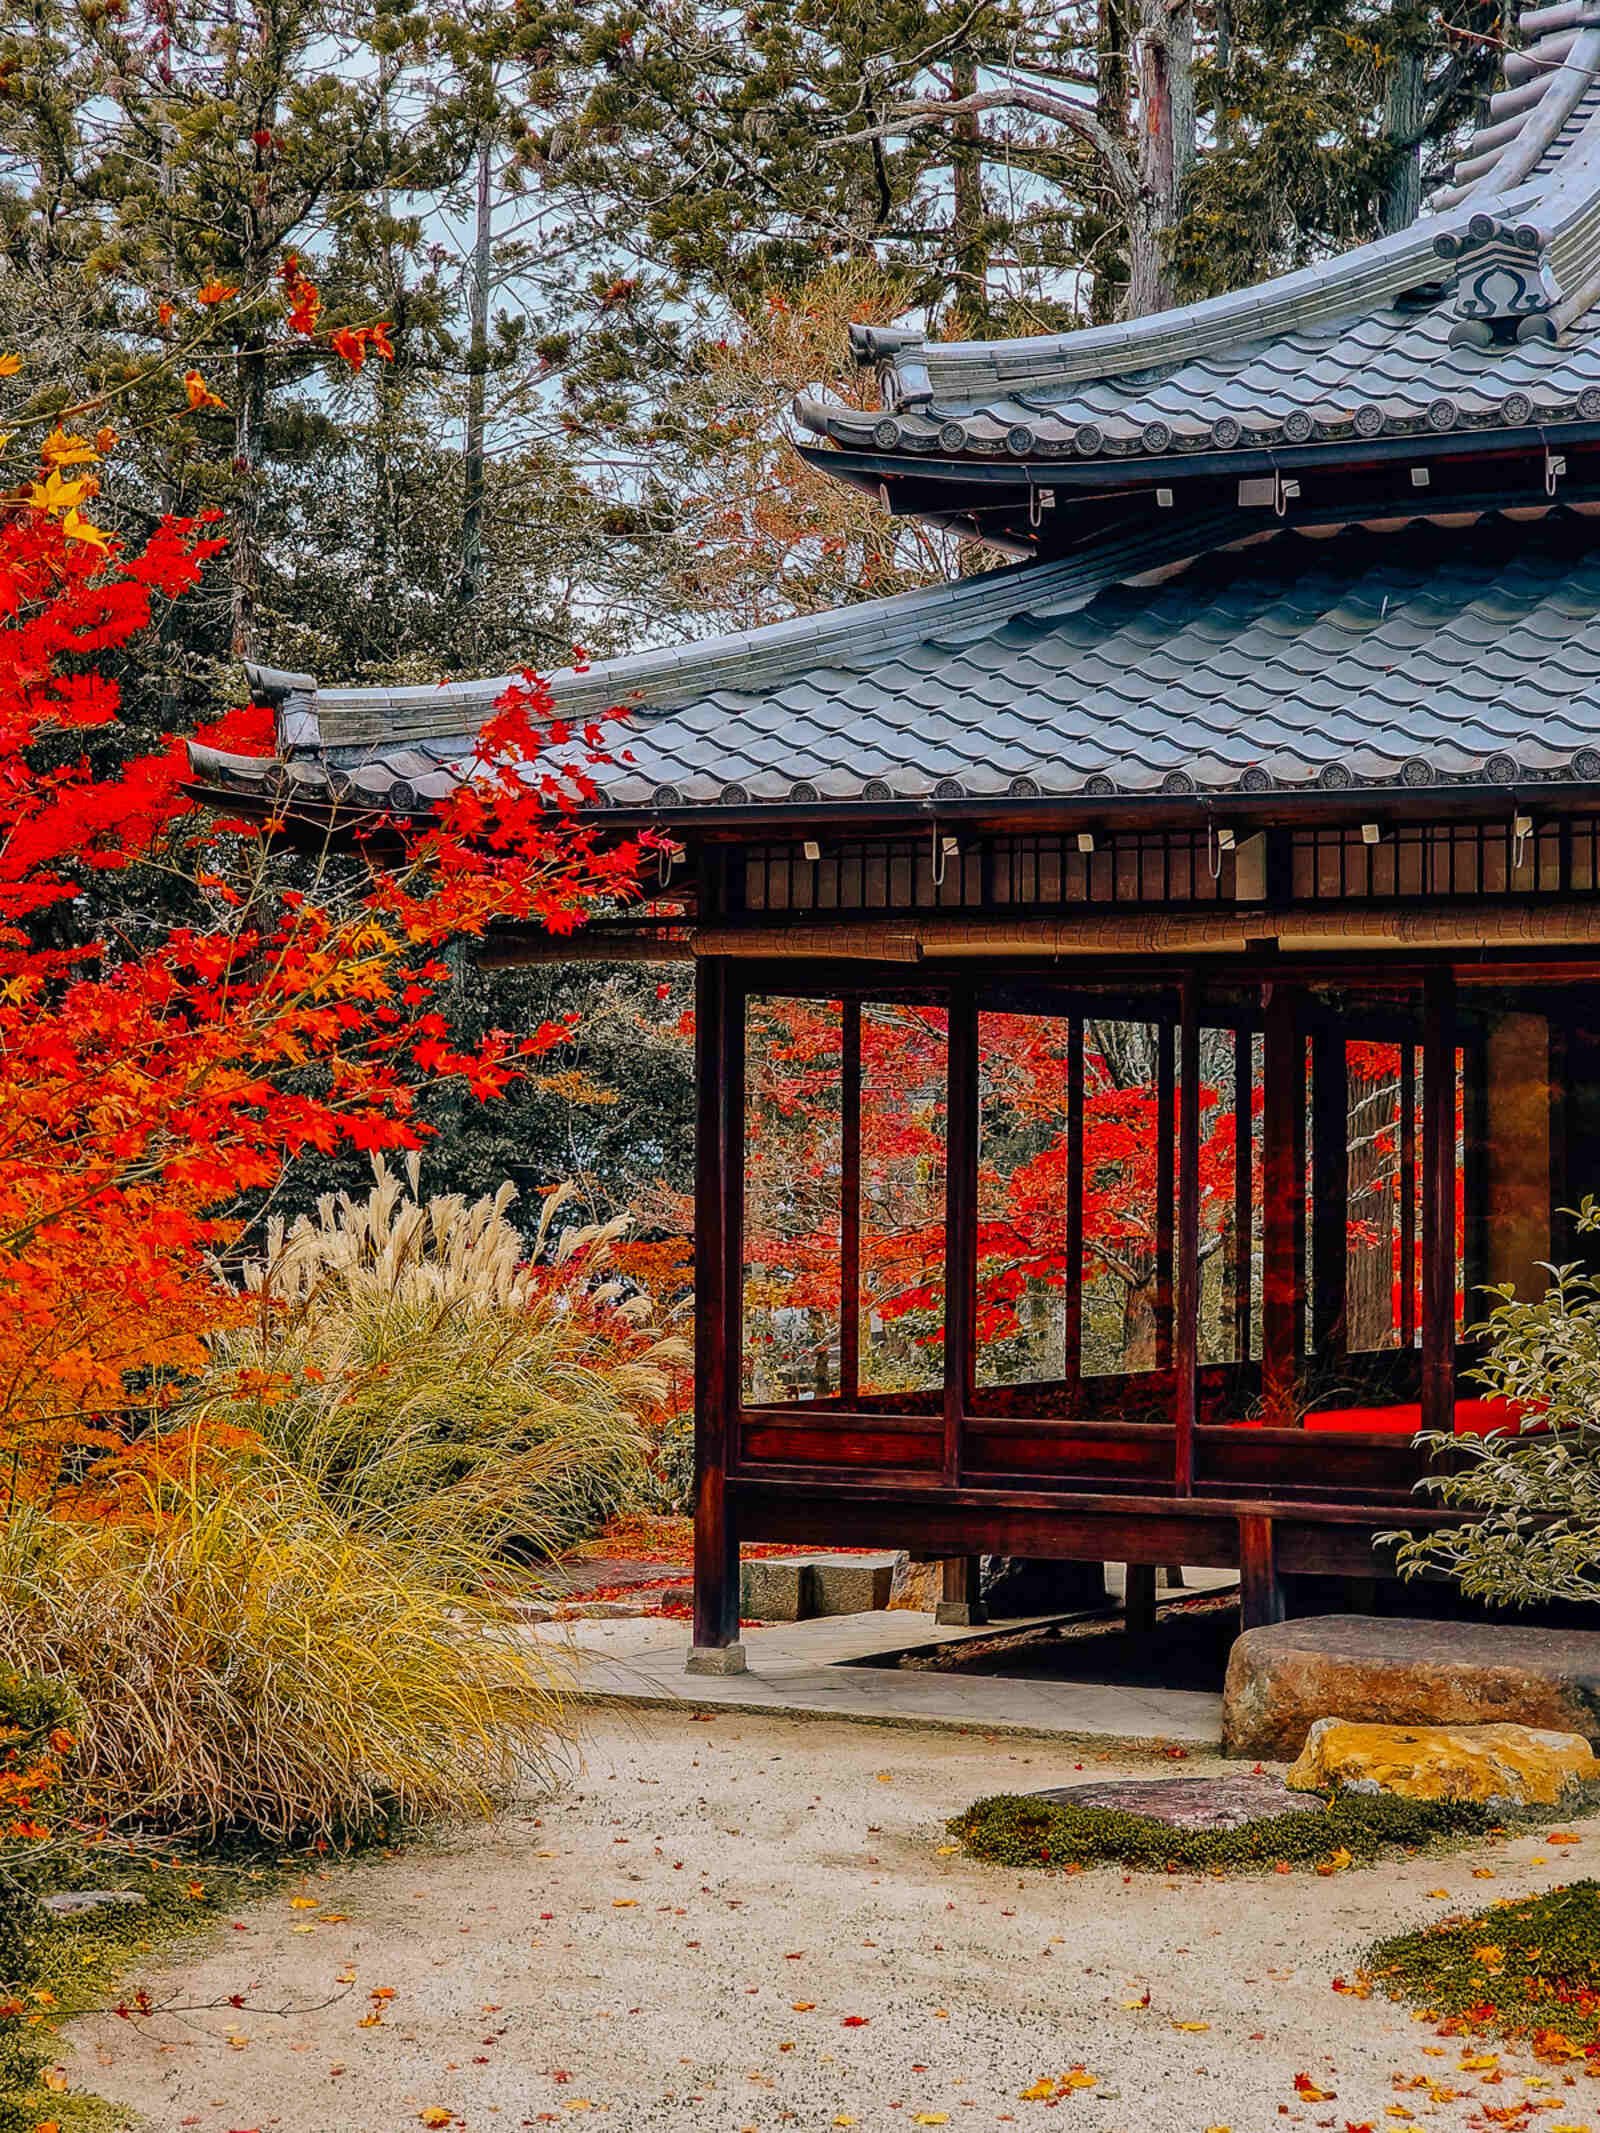 a traditional wooden japanese temple with glass walls and autumn foliage is visible all around